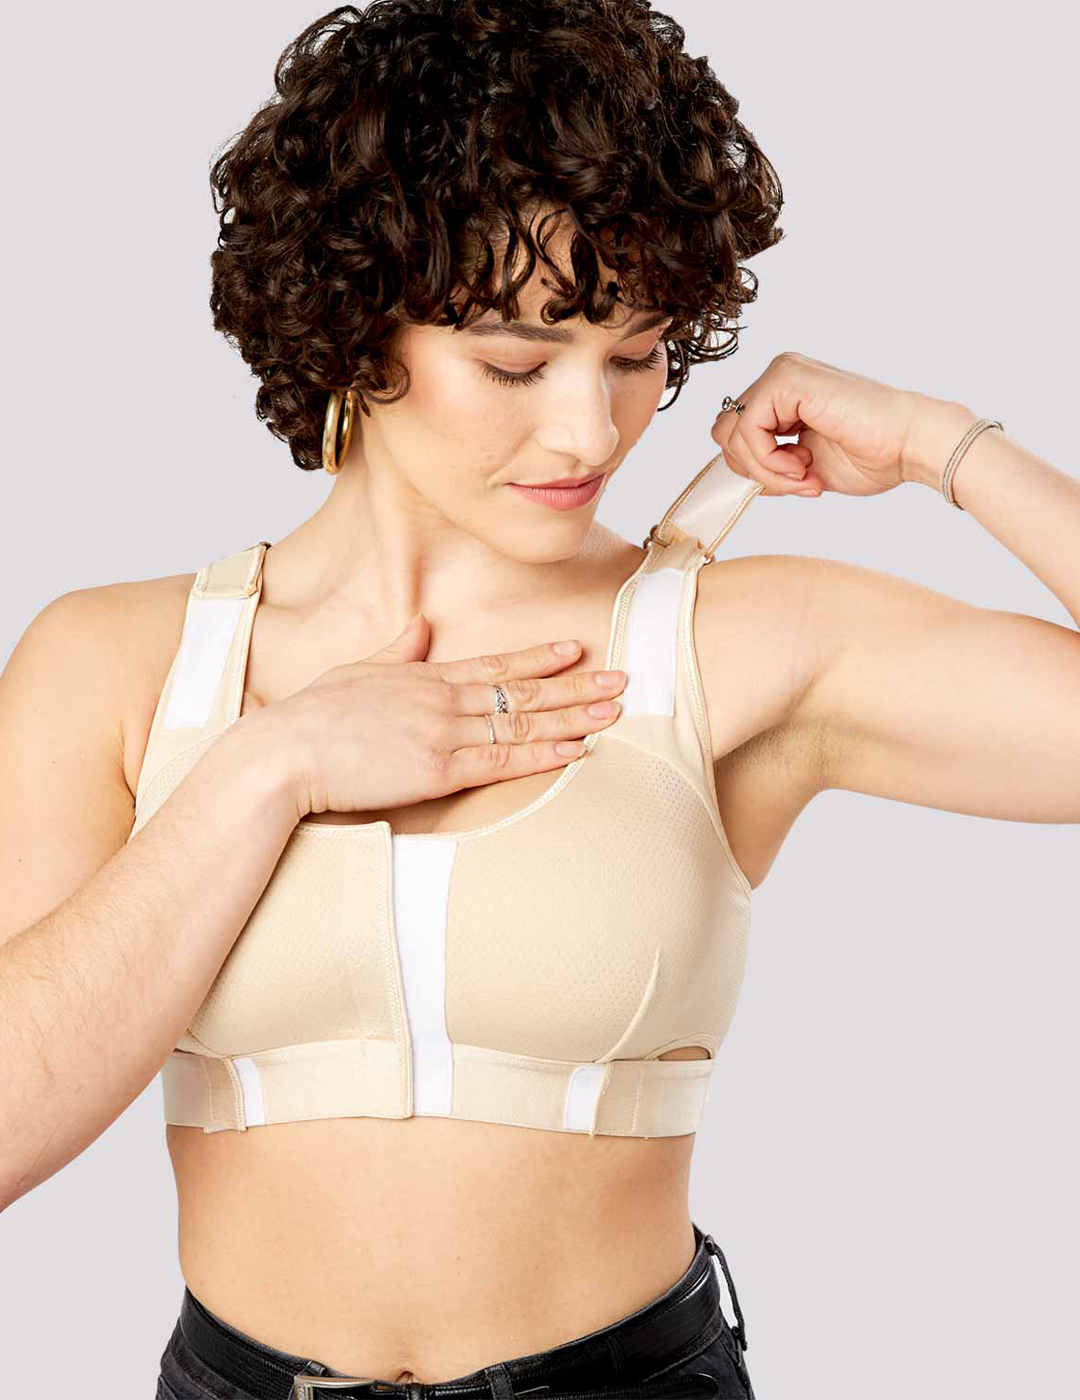 Post-Surgery Bras: Supporting Women's Health During Recover - HauteFlair